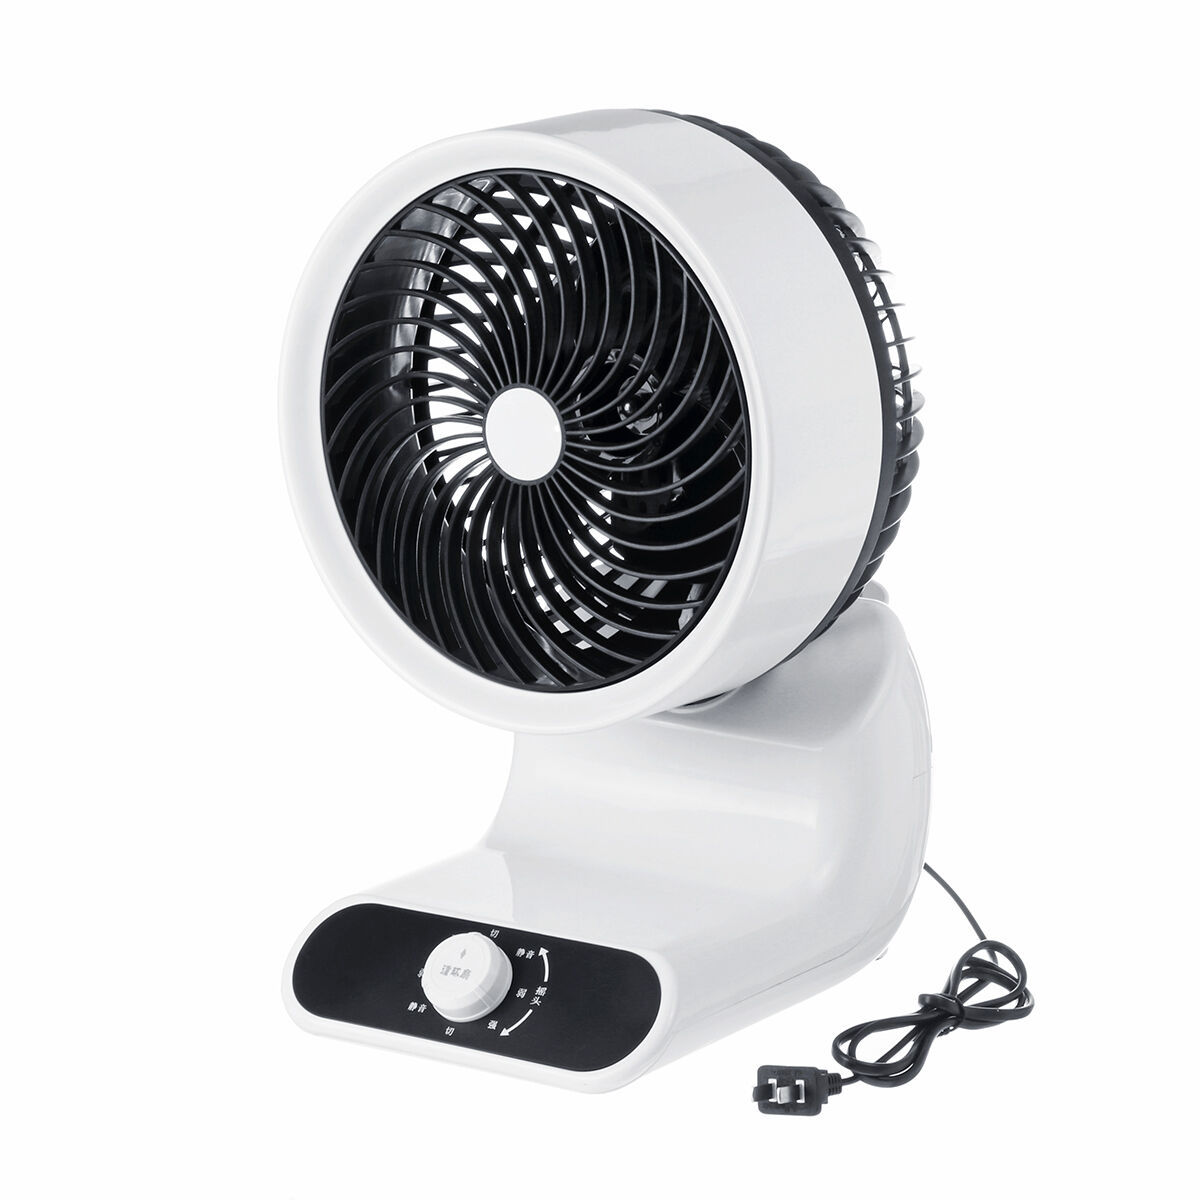 220V 40W 3 Speed Portable Air Circulator Cooling Fan USB Charging Cooler Home Room